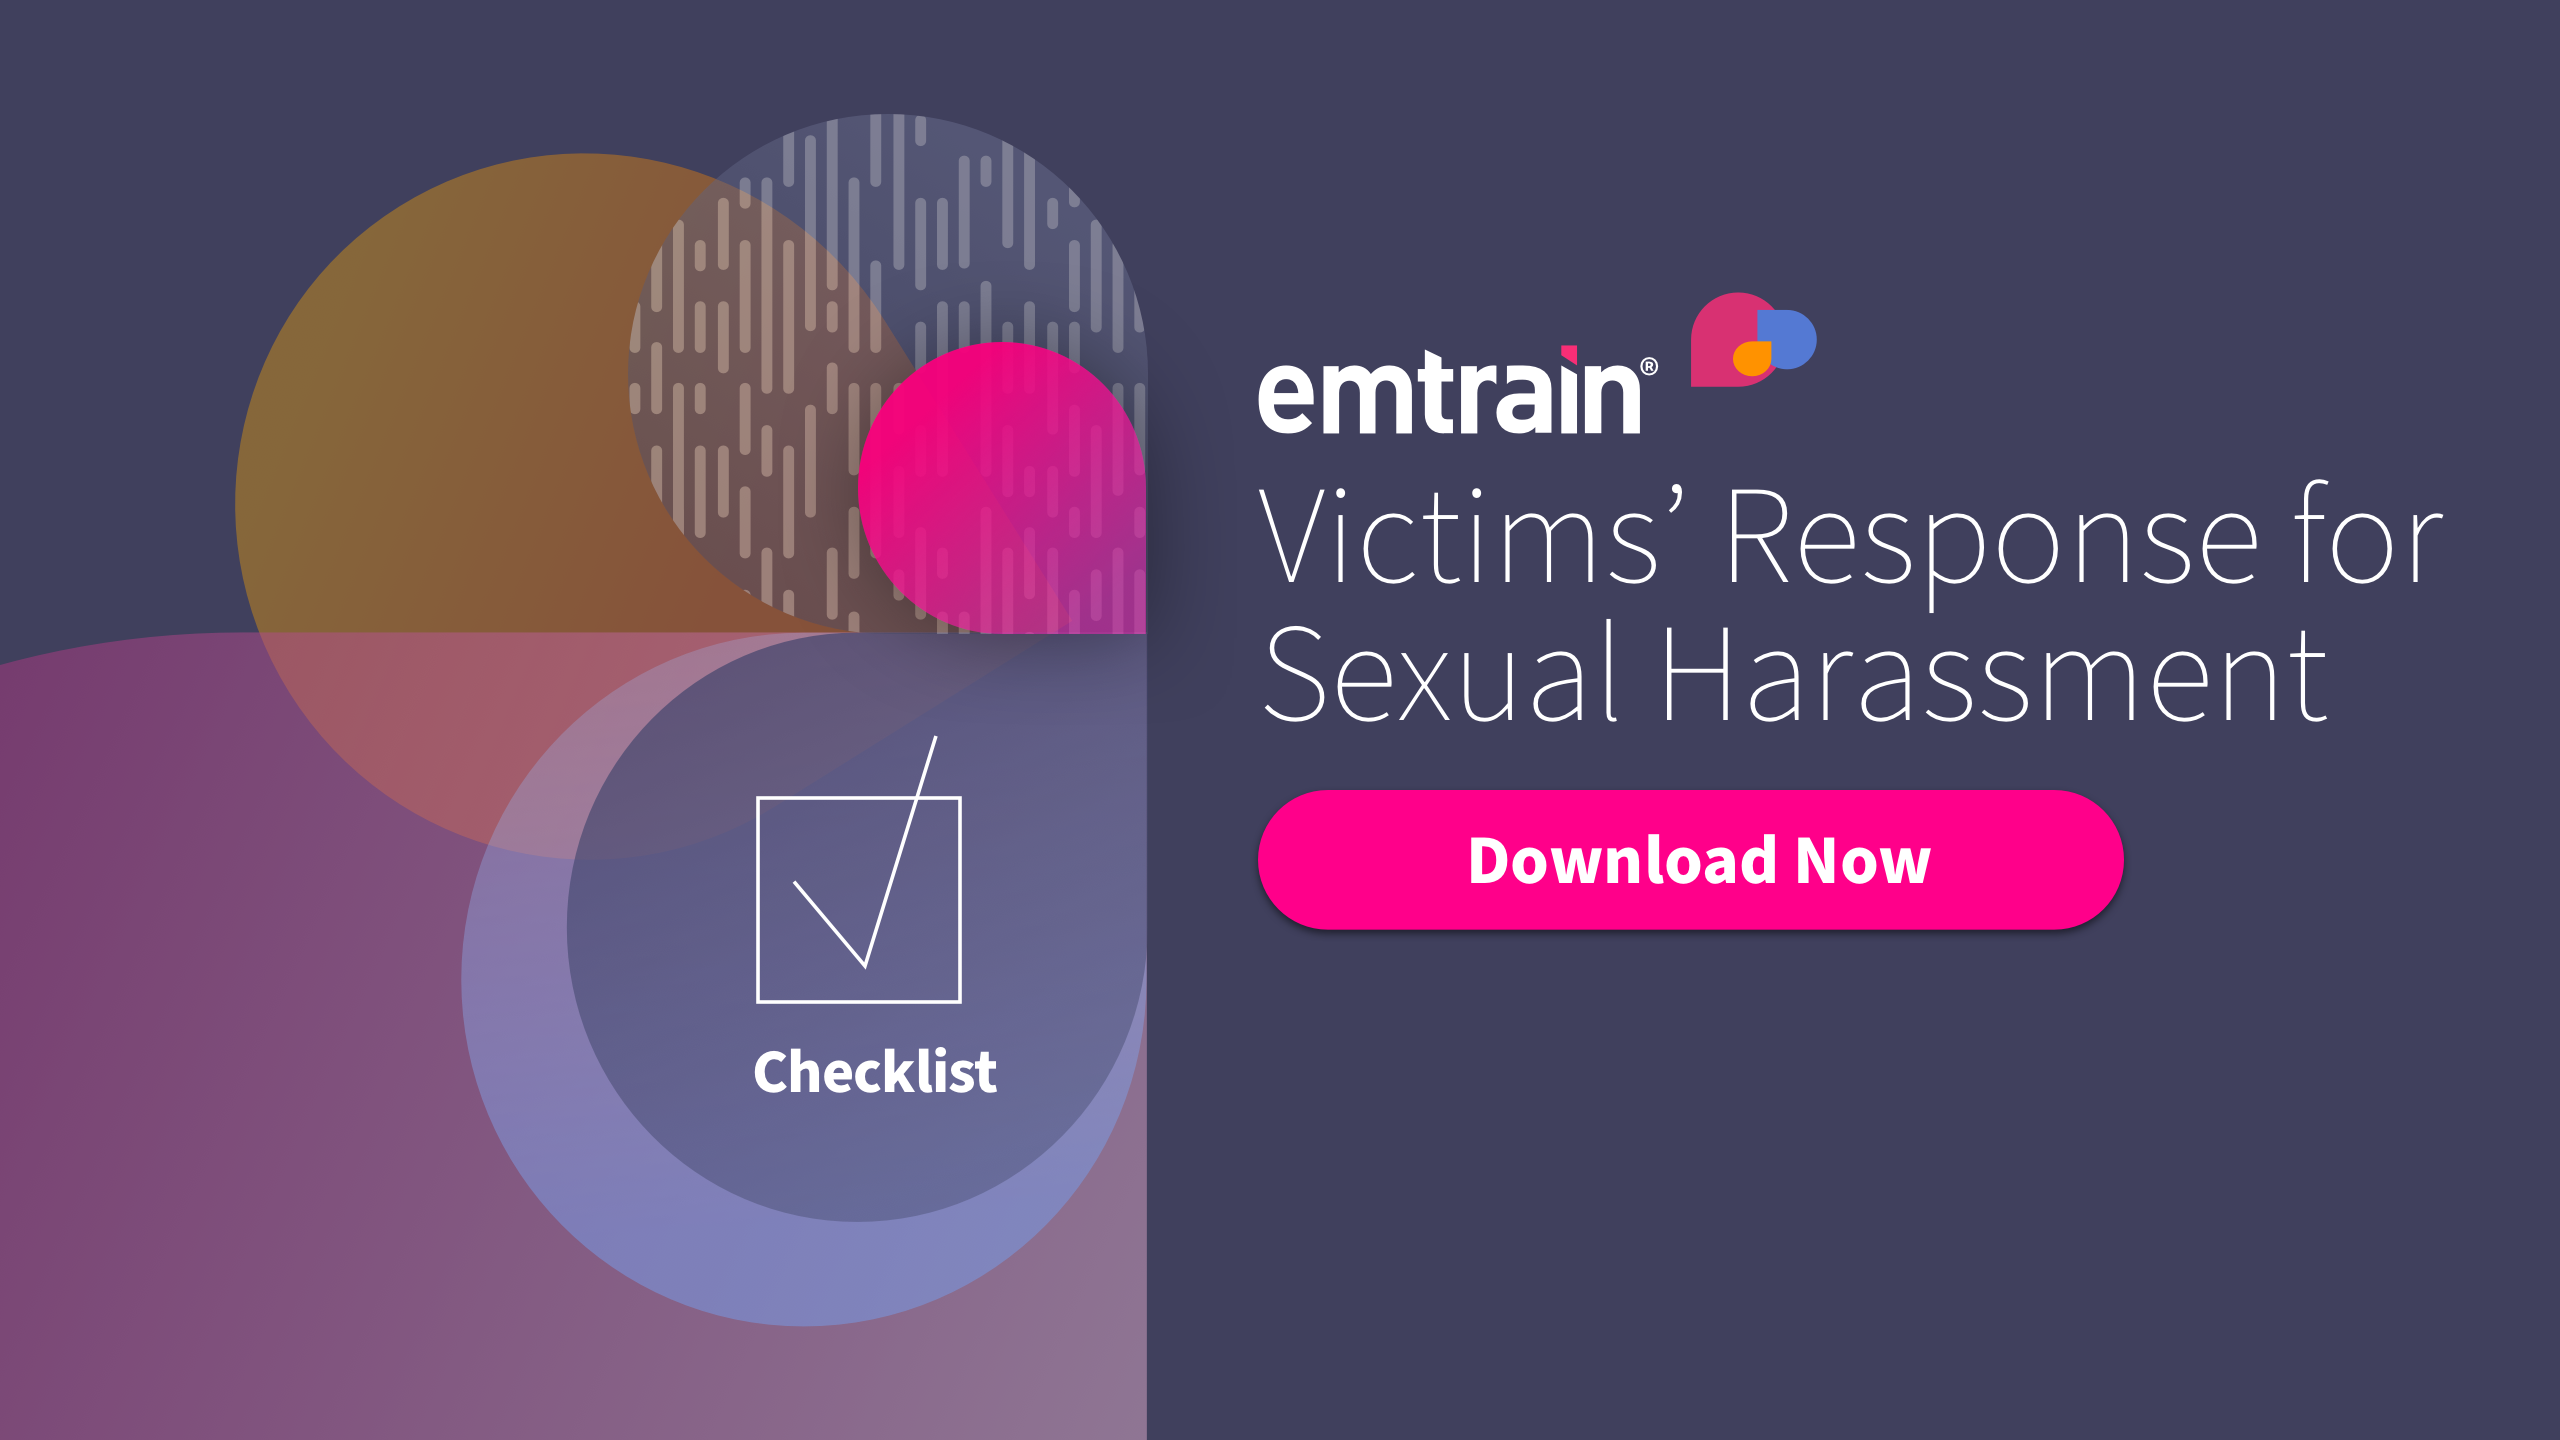 Victims’ Response for Sexual Harassment